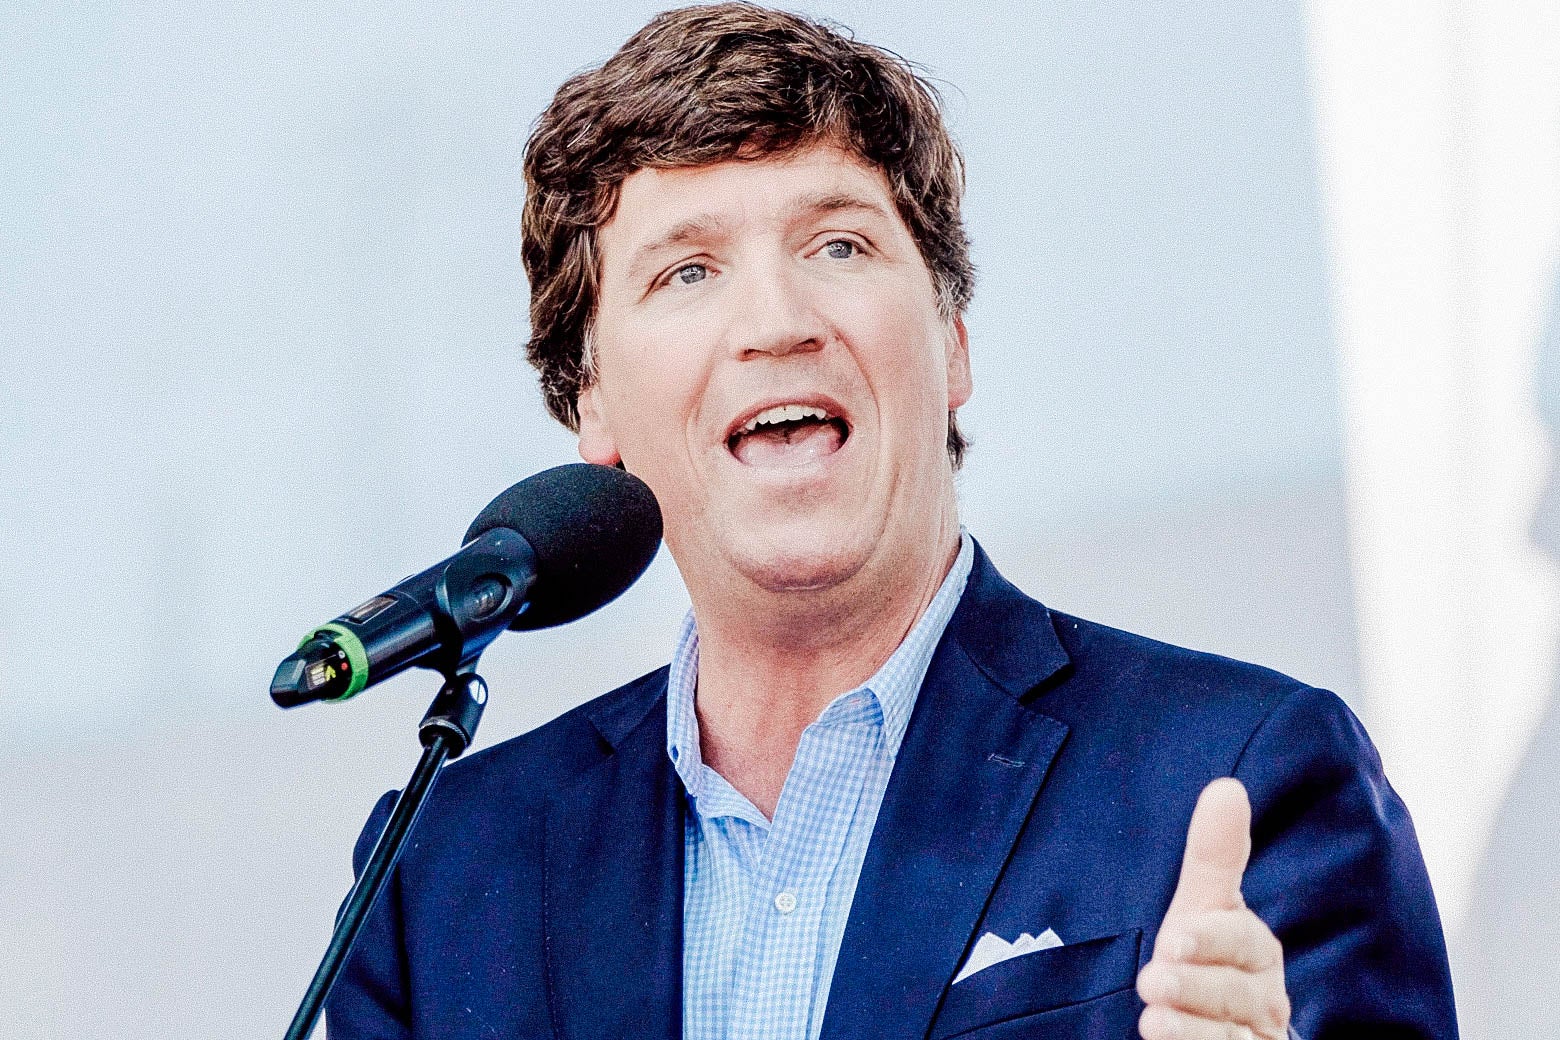 Tucker Carlson onstage speaking at a mic